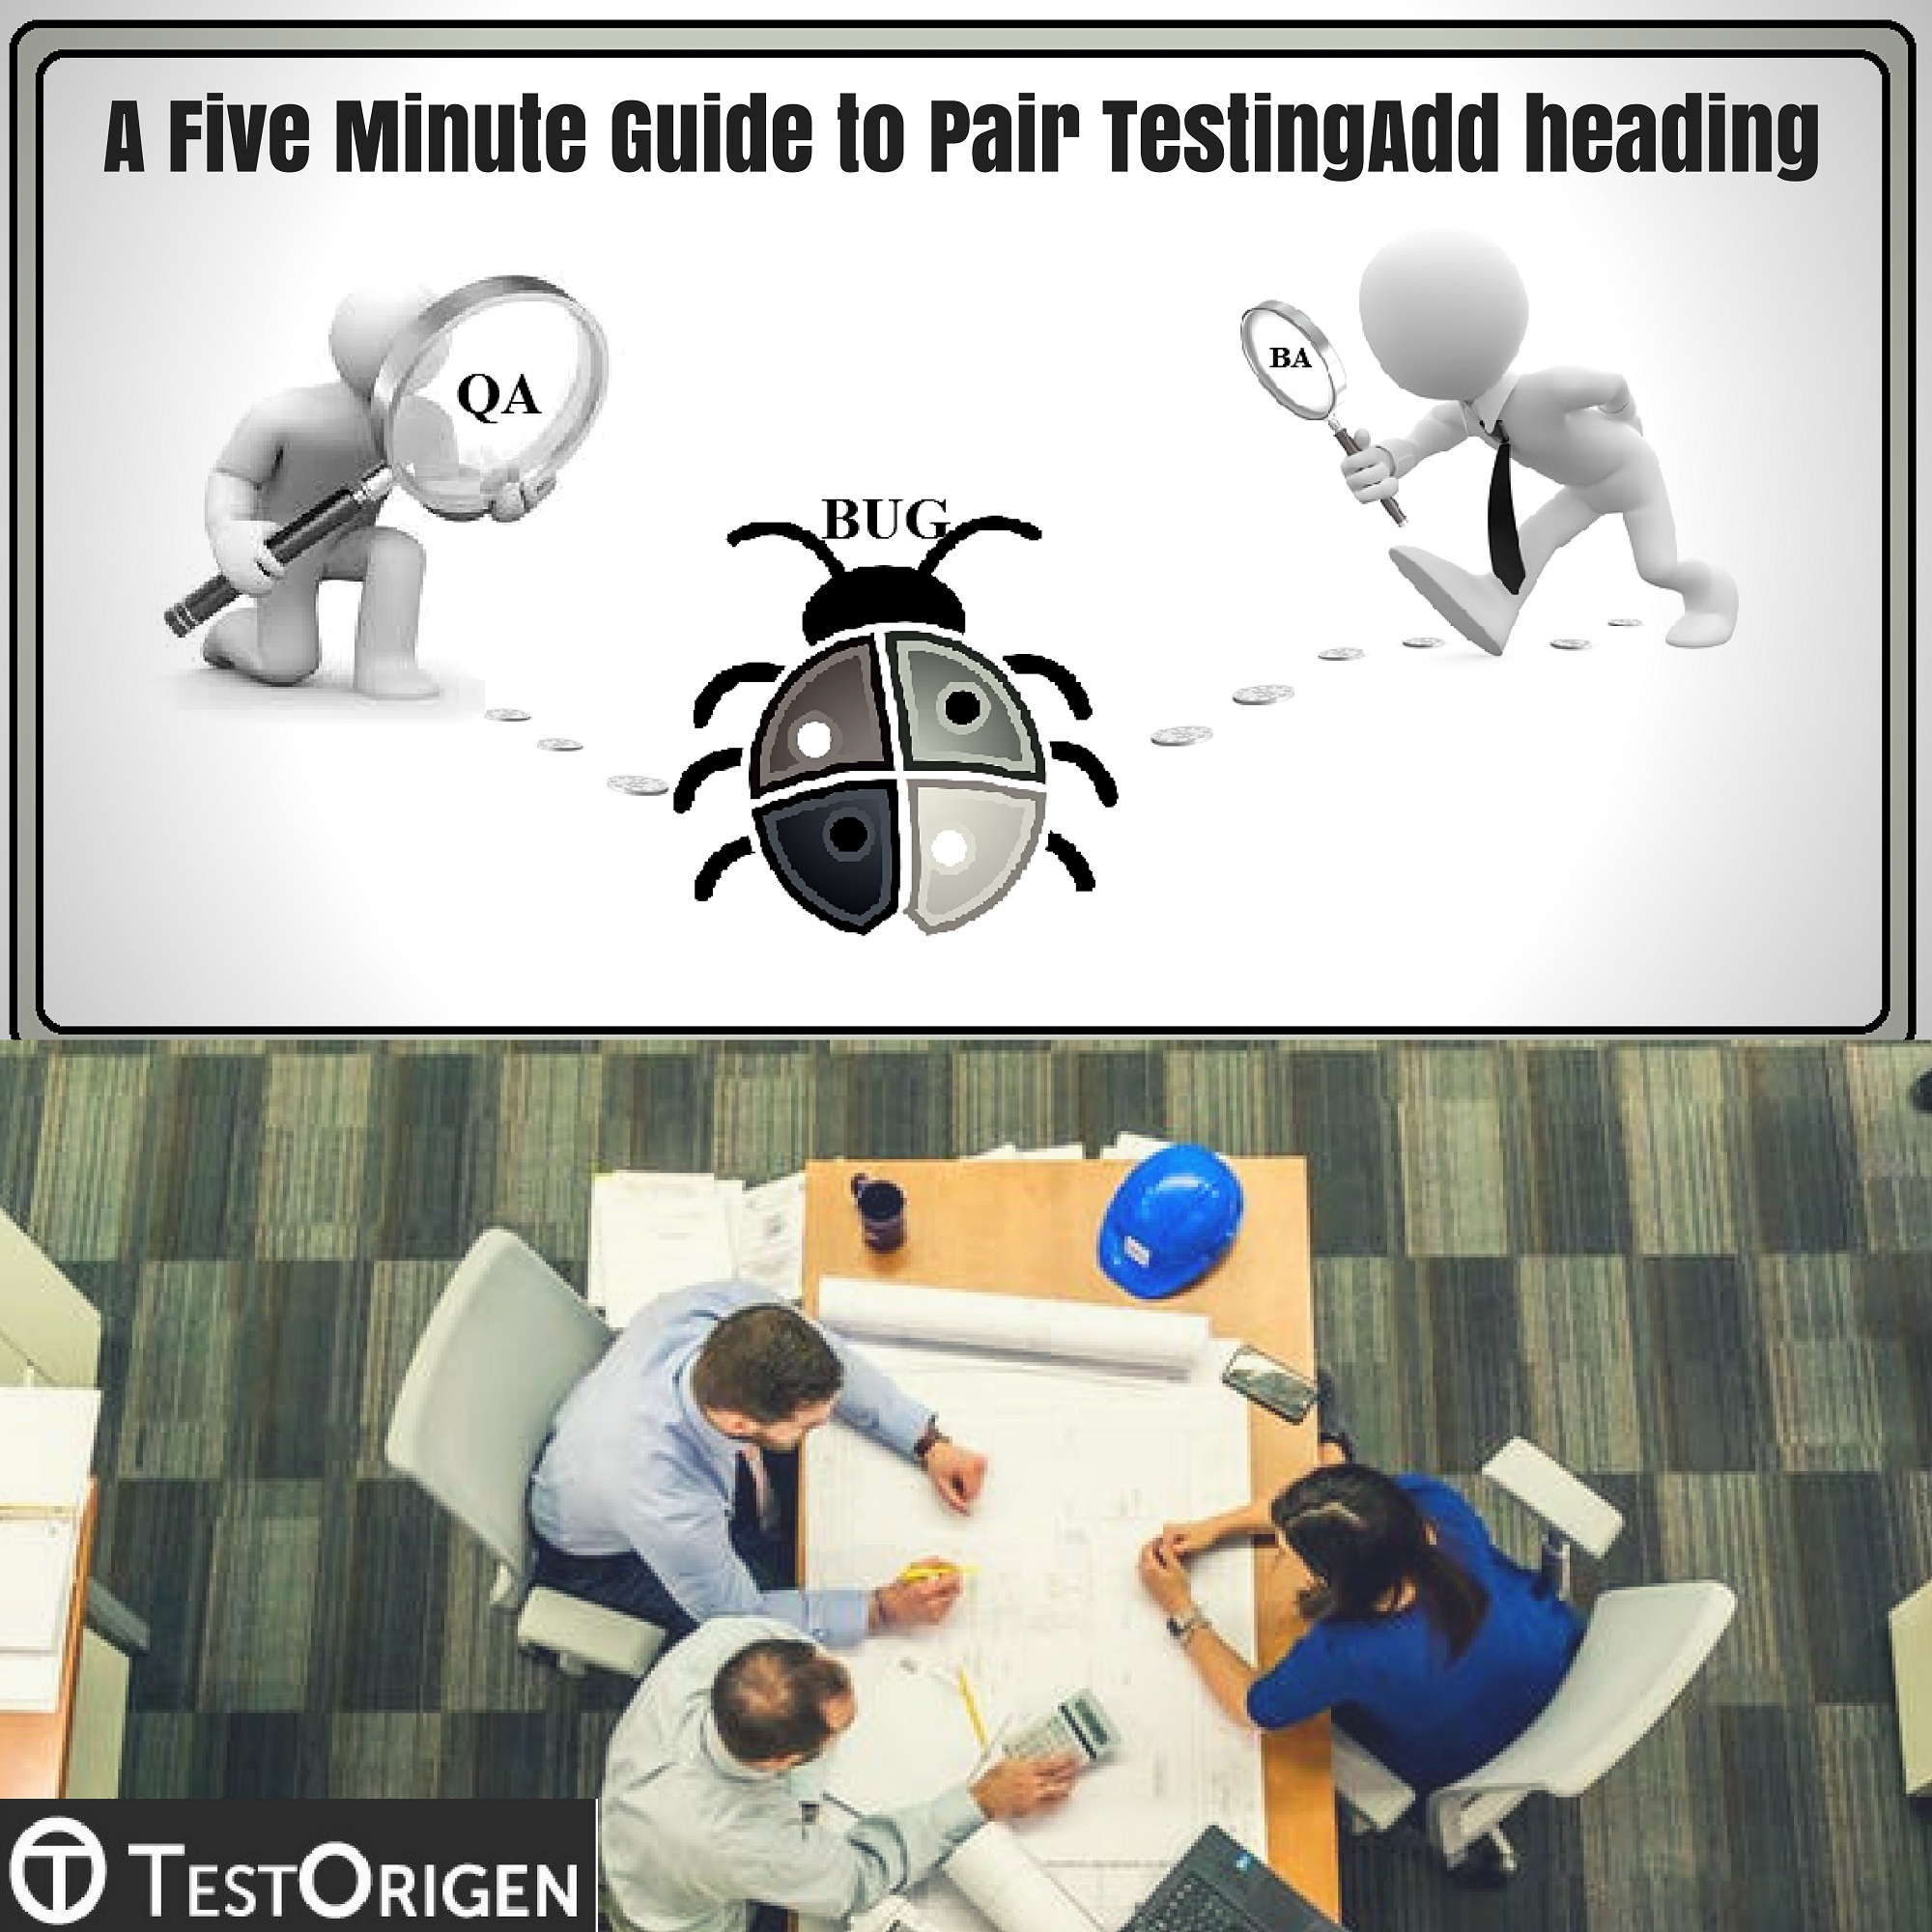 A Five Minute Guide to Pair Testing